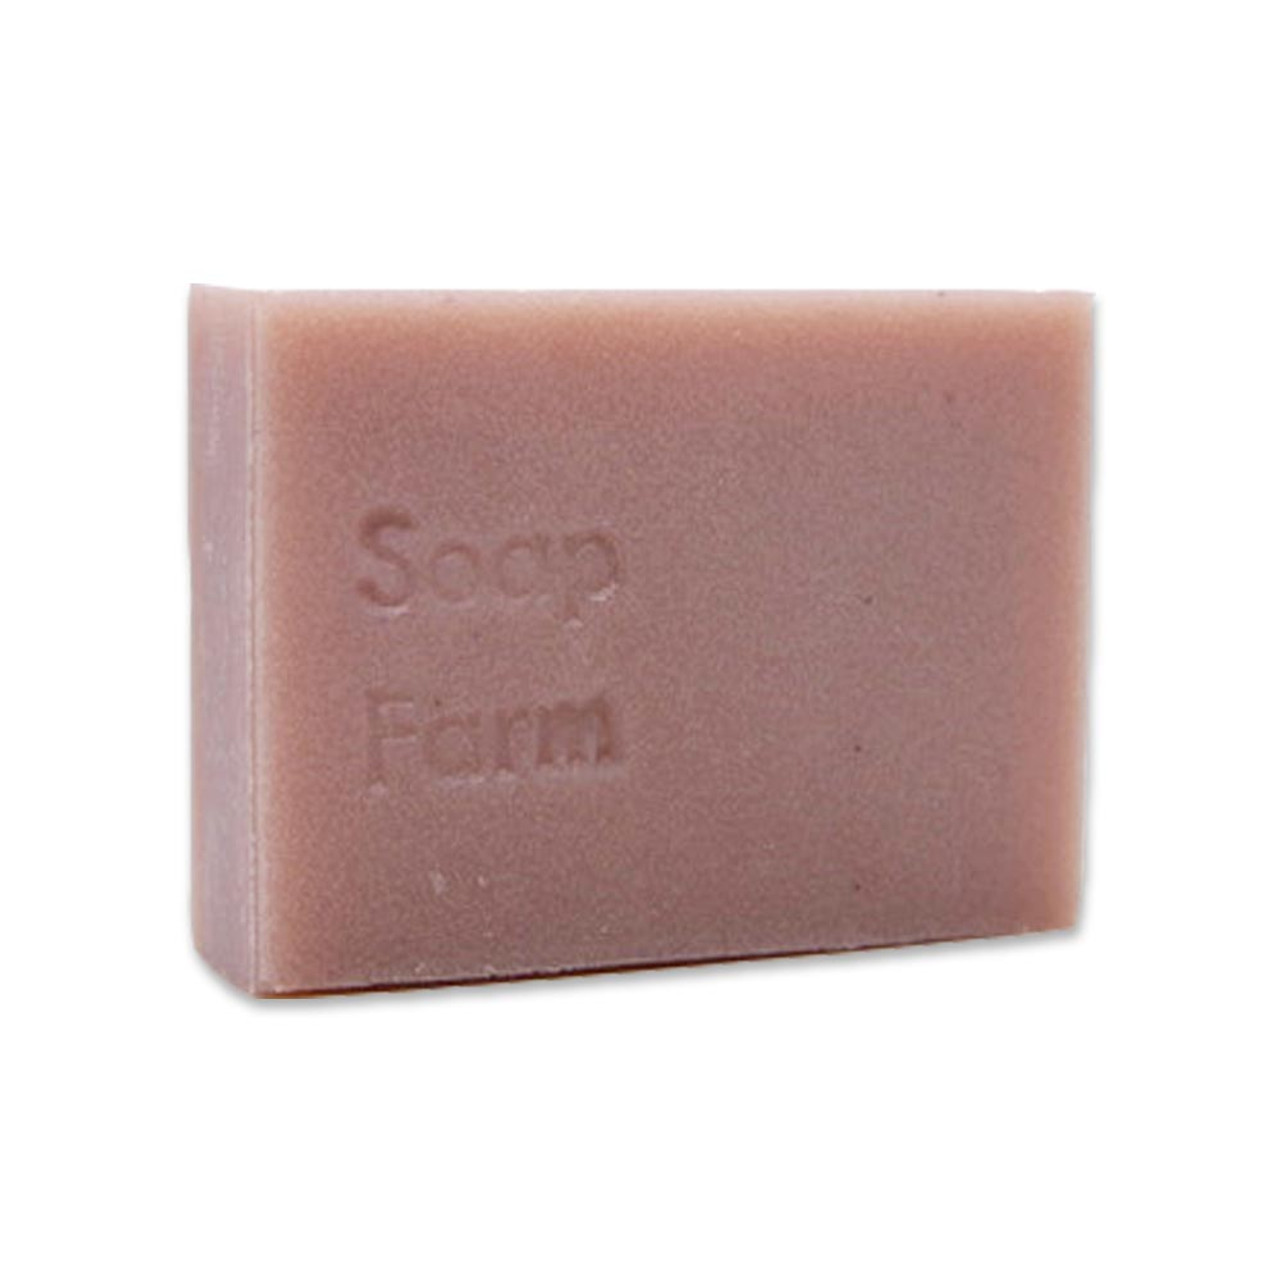 SUPERFAT Natural Soap Limited Edition Cherry Blossom, 6 oz Bar